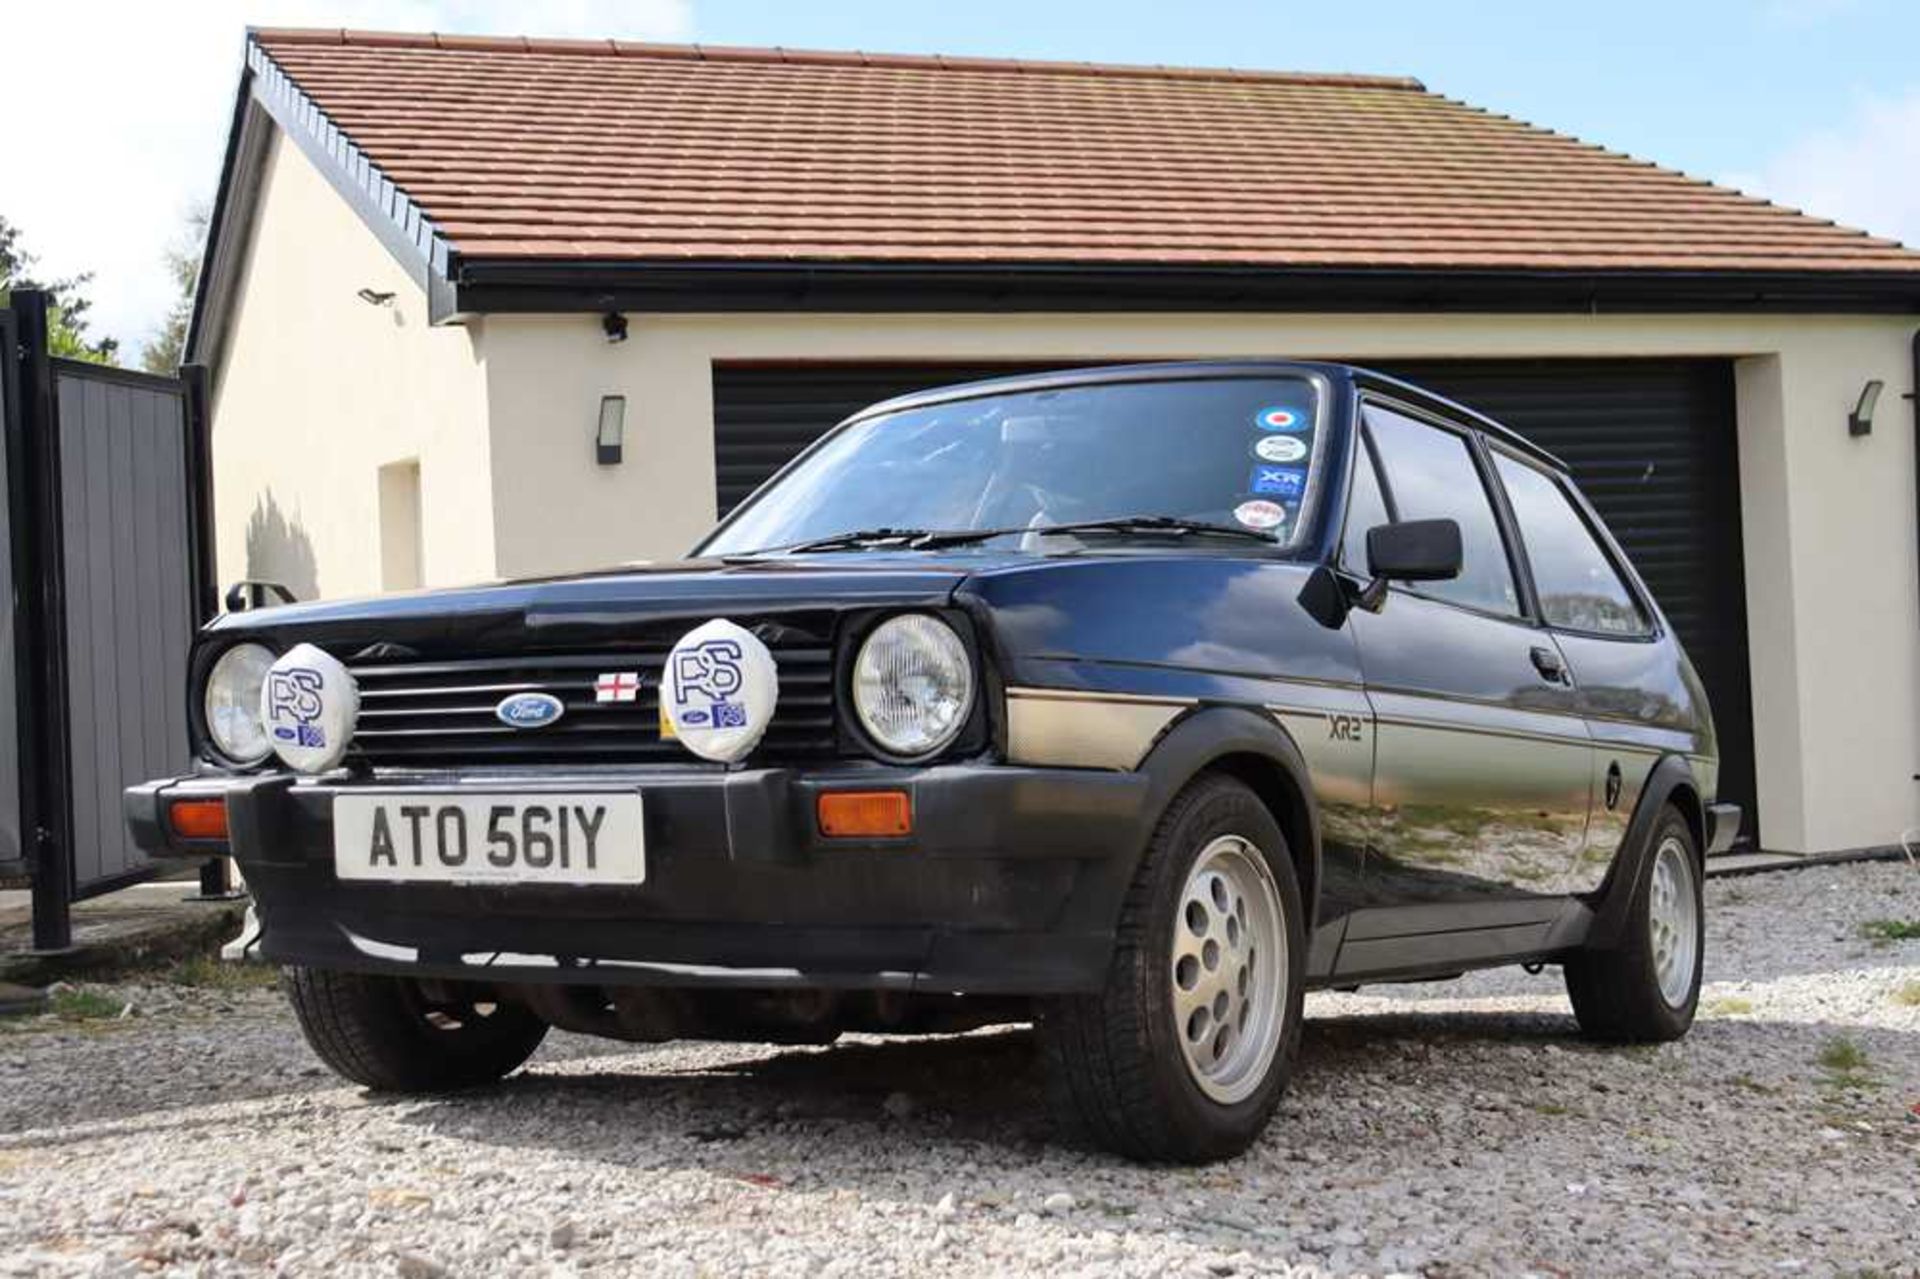 1983 Ford Fiesta XR2 - Image 6 of 56